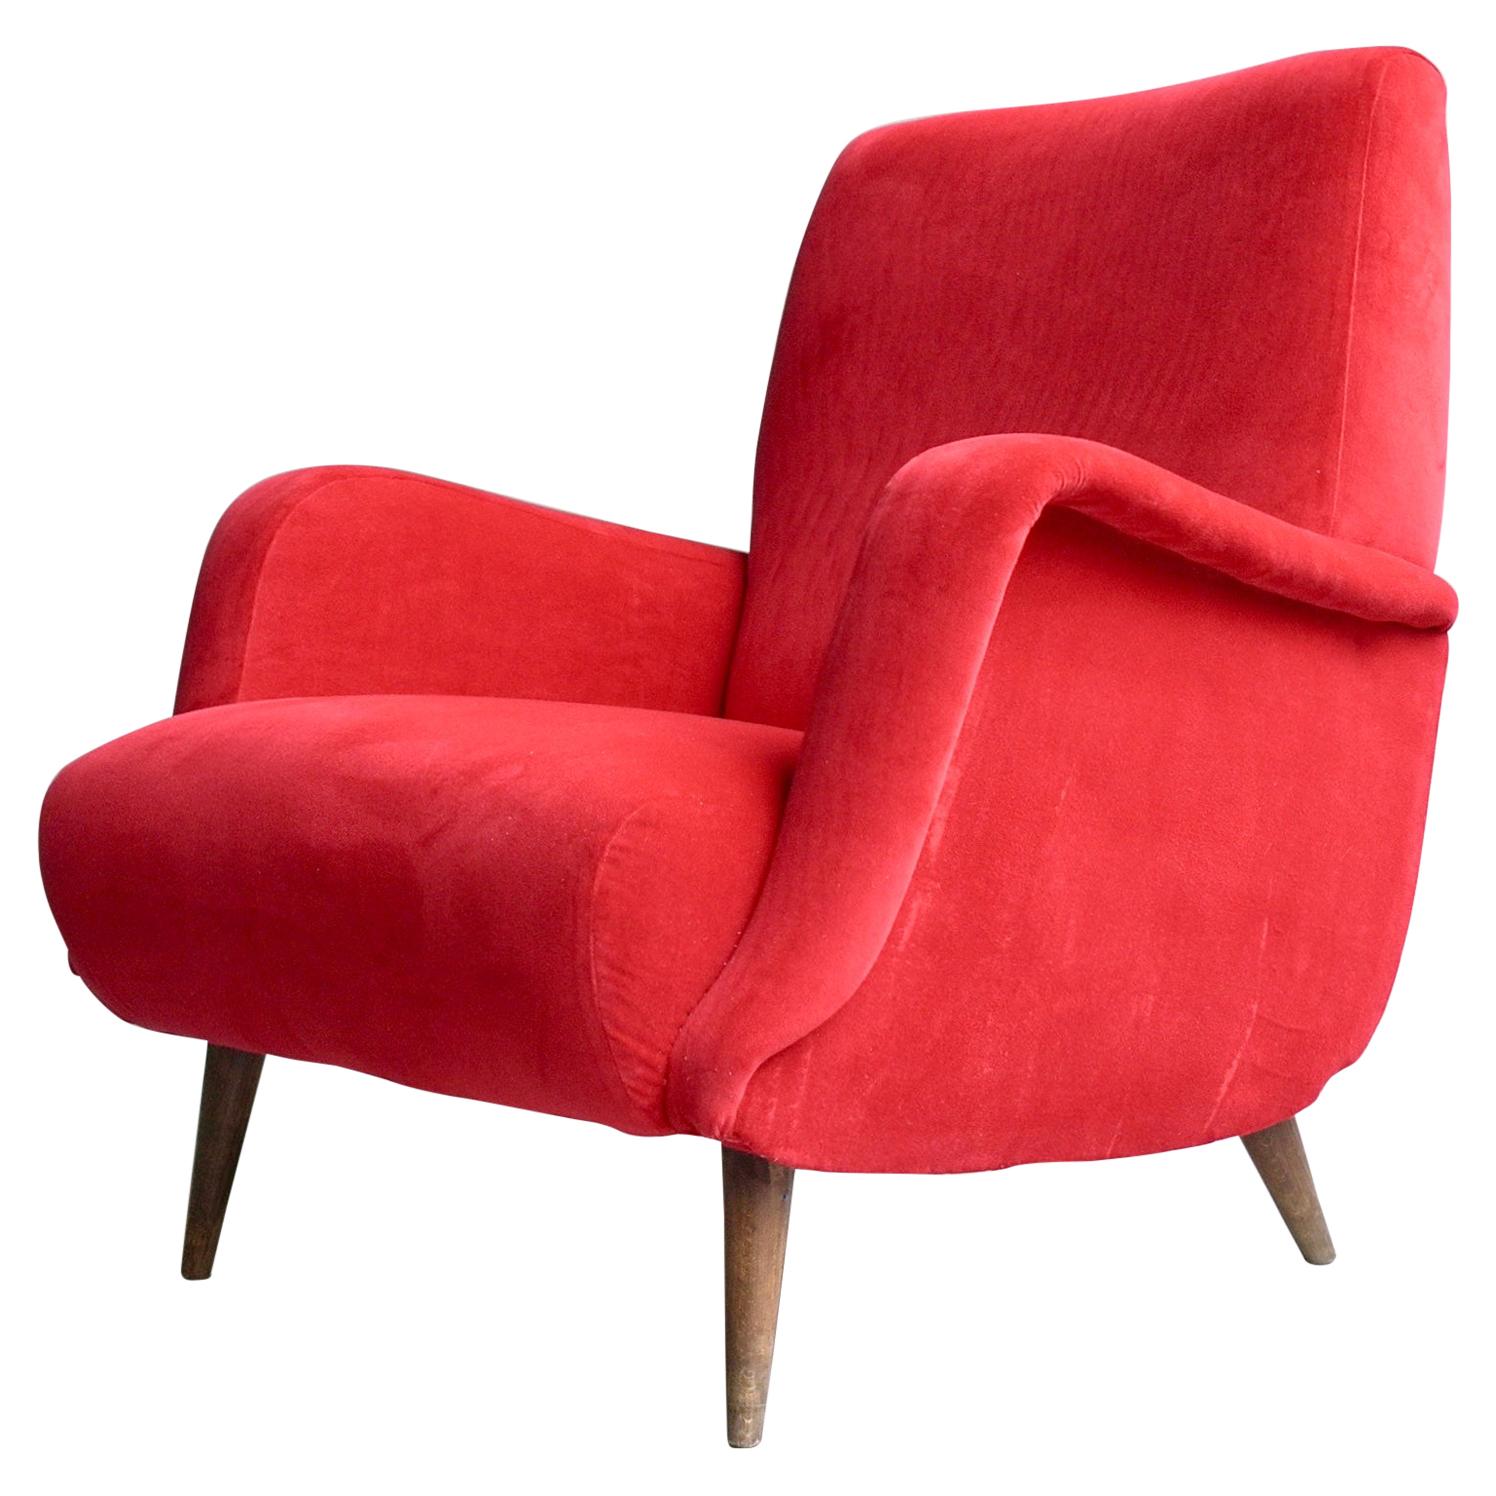 Carlo de Carli Red velvet and Walnut Armchair Model 806 by Cassina, Italy, 1955 For Sale